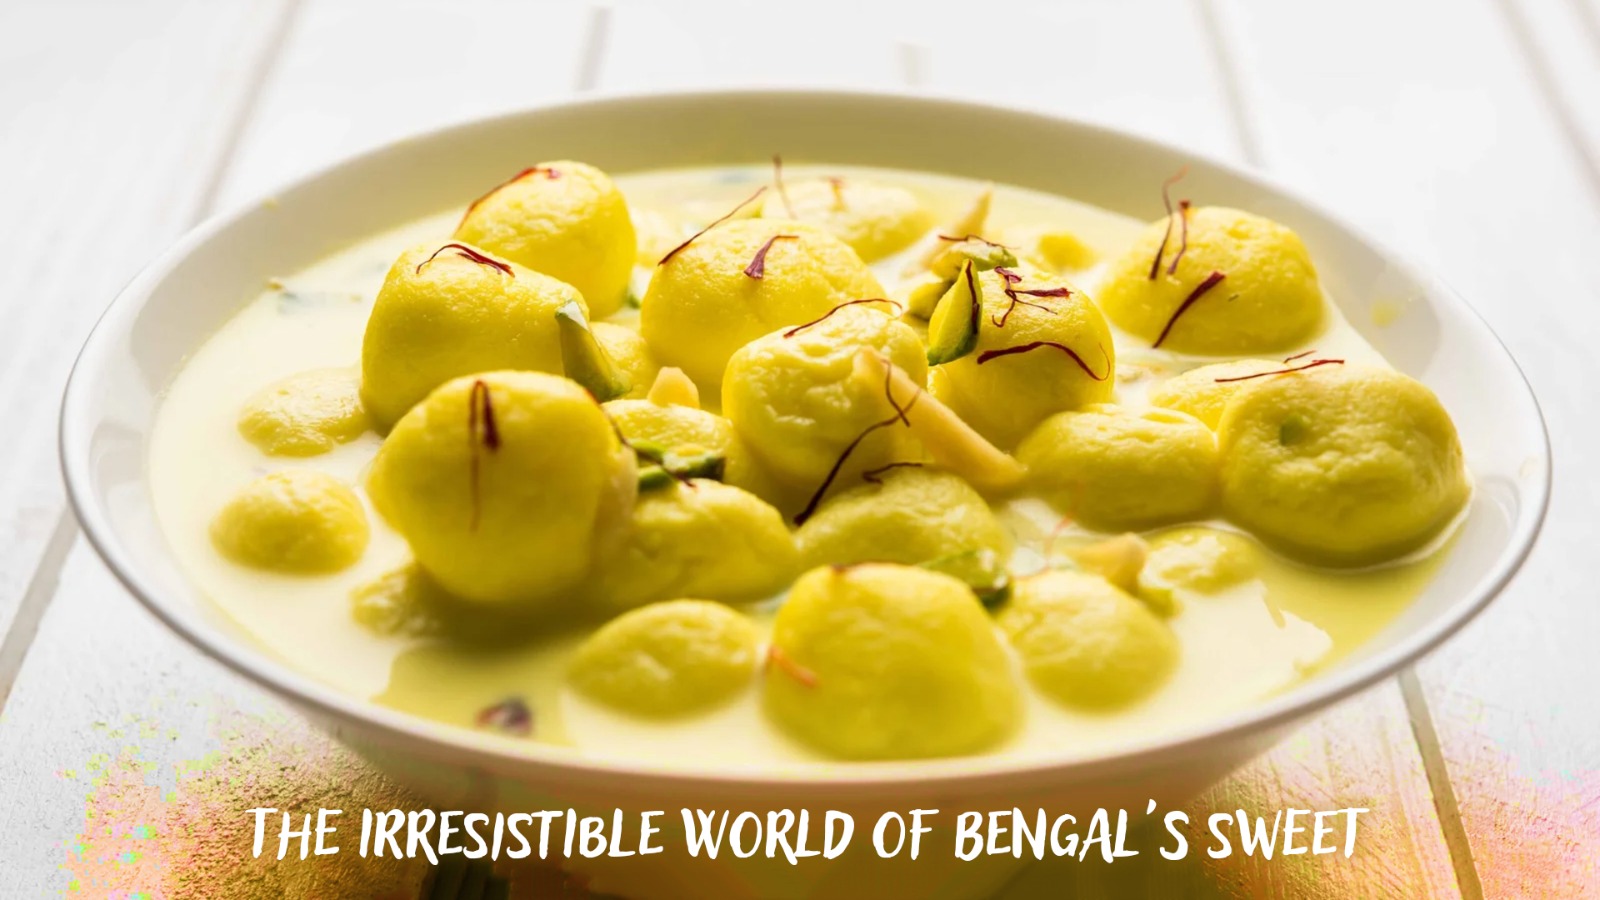 The Irresistible World of Bengal’s Sweet